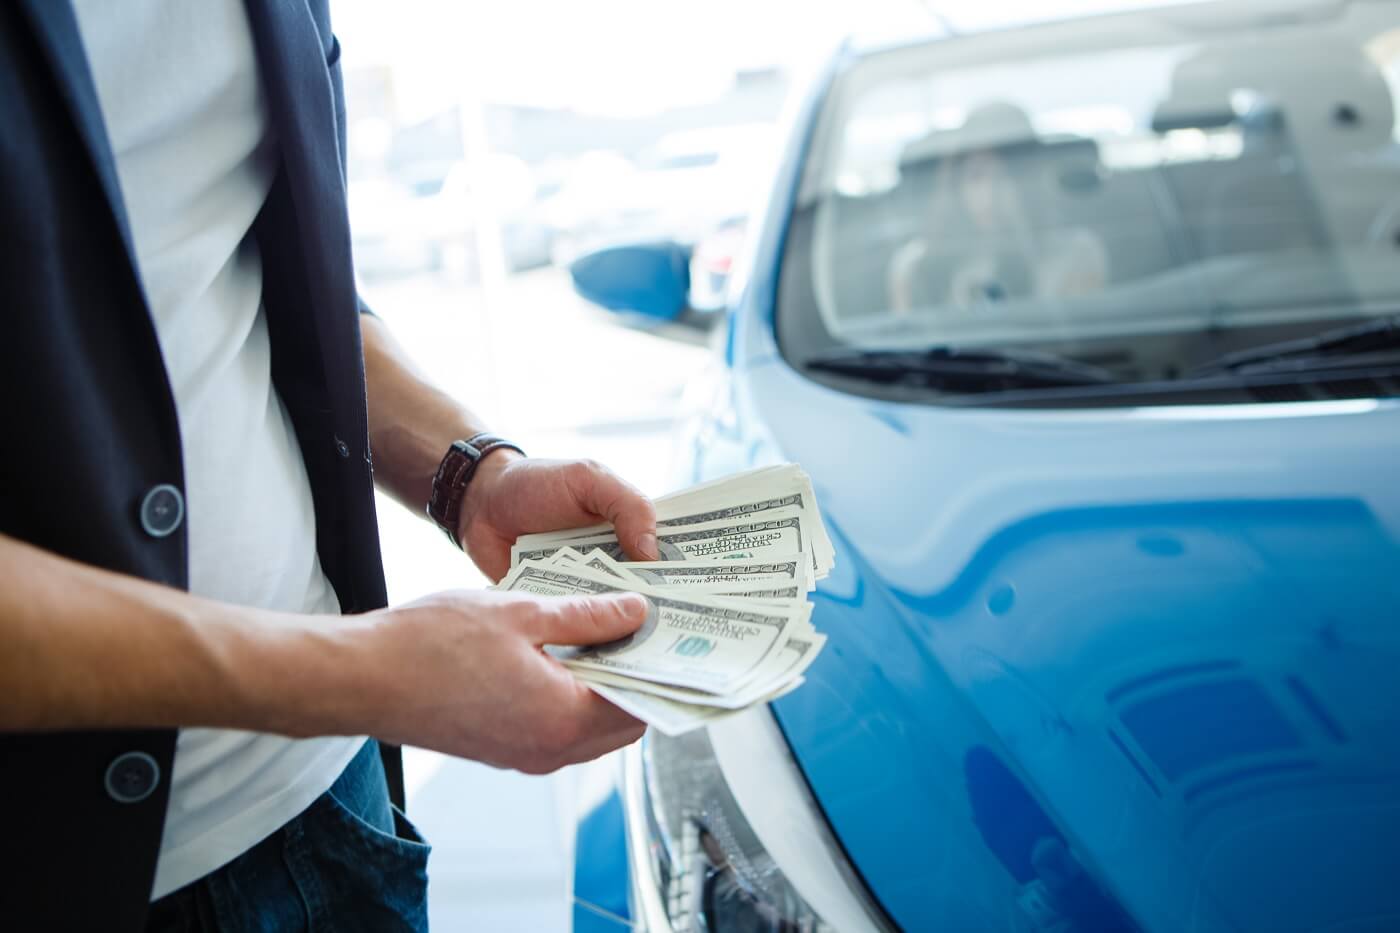 Reasons to Trade-In Used Car